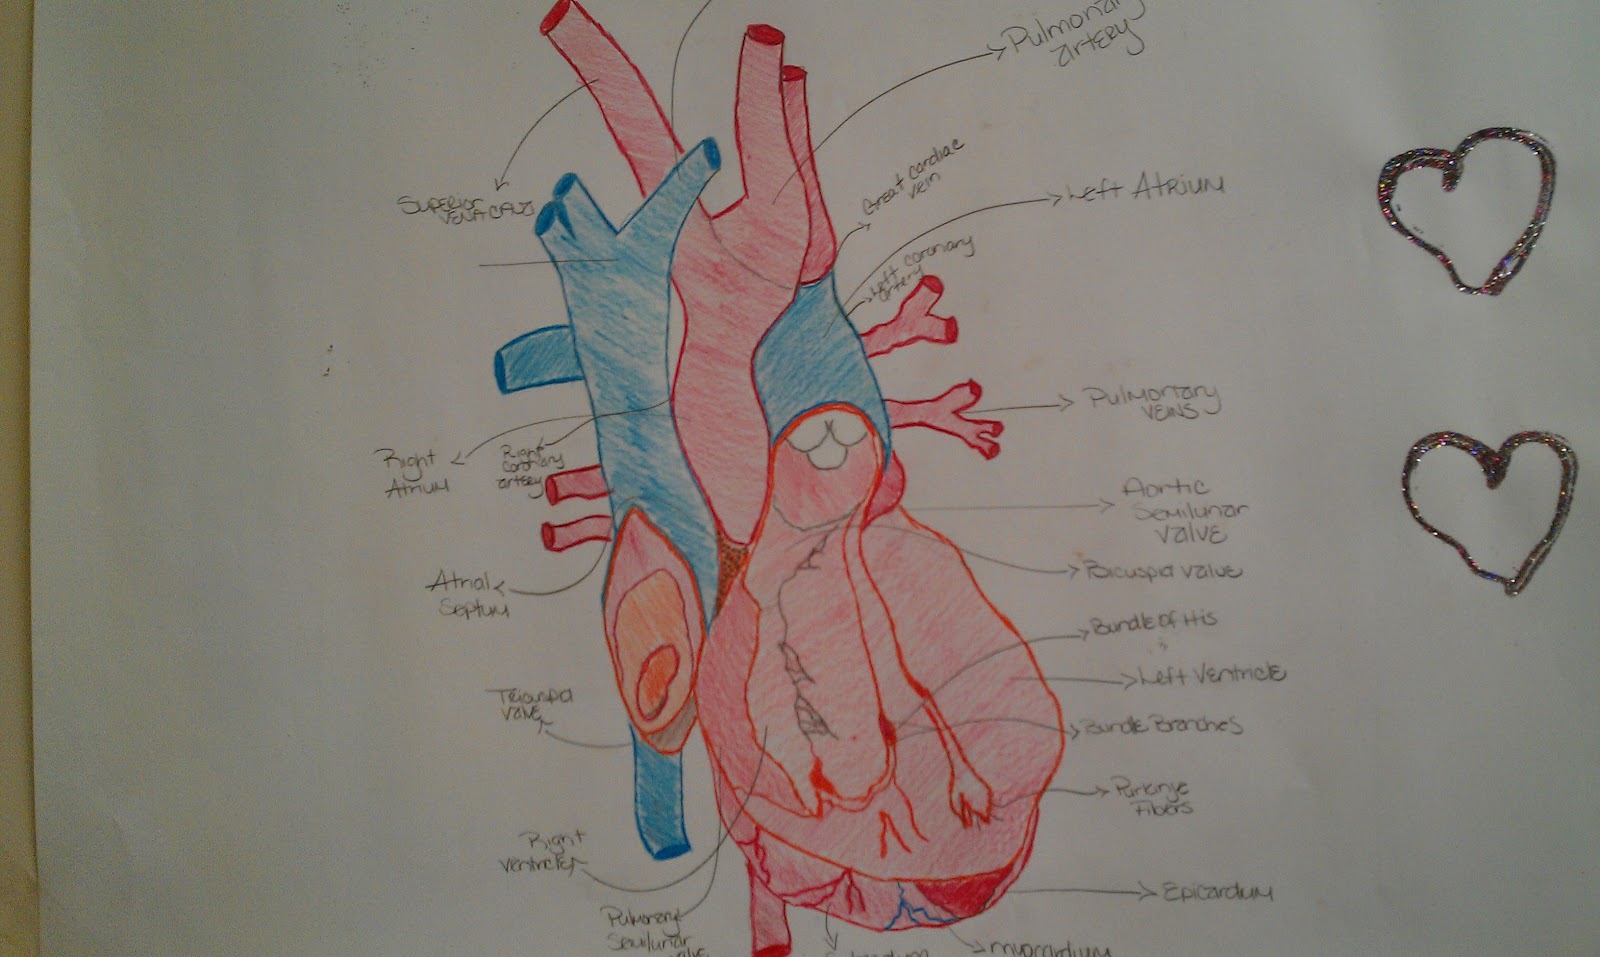 Human Heart Pictures For Students - Aflam-Neeeak